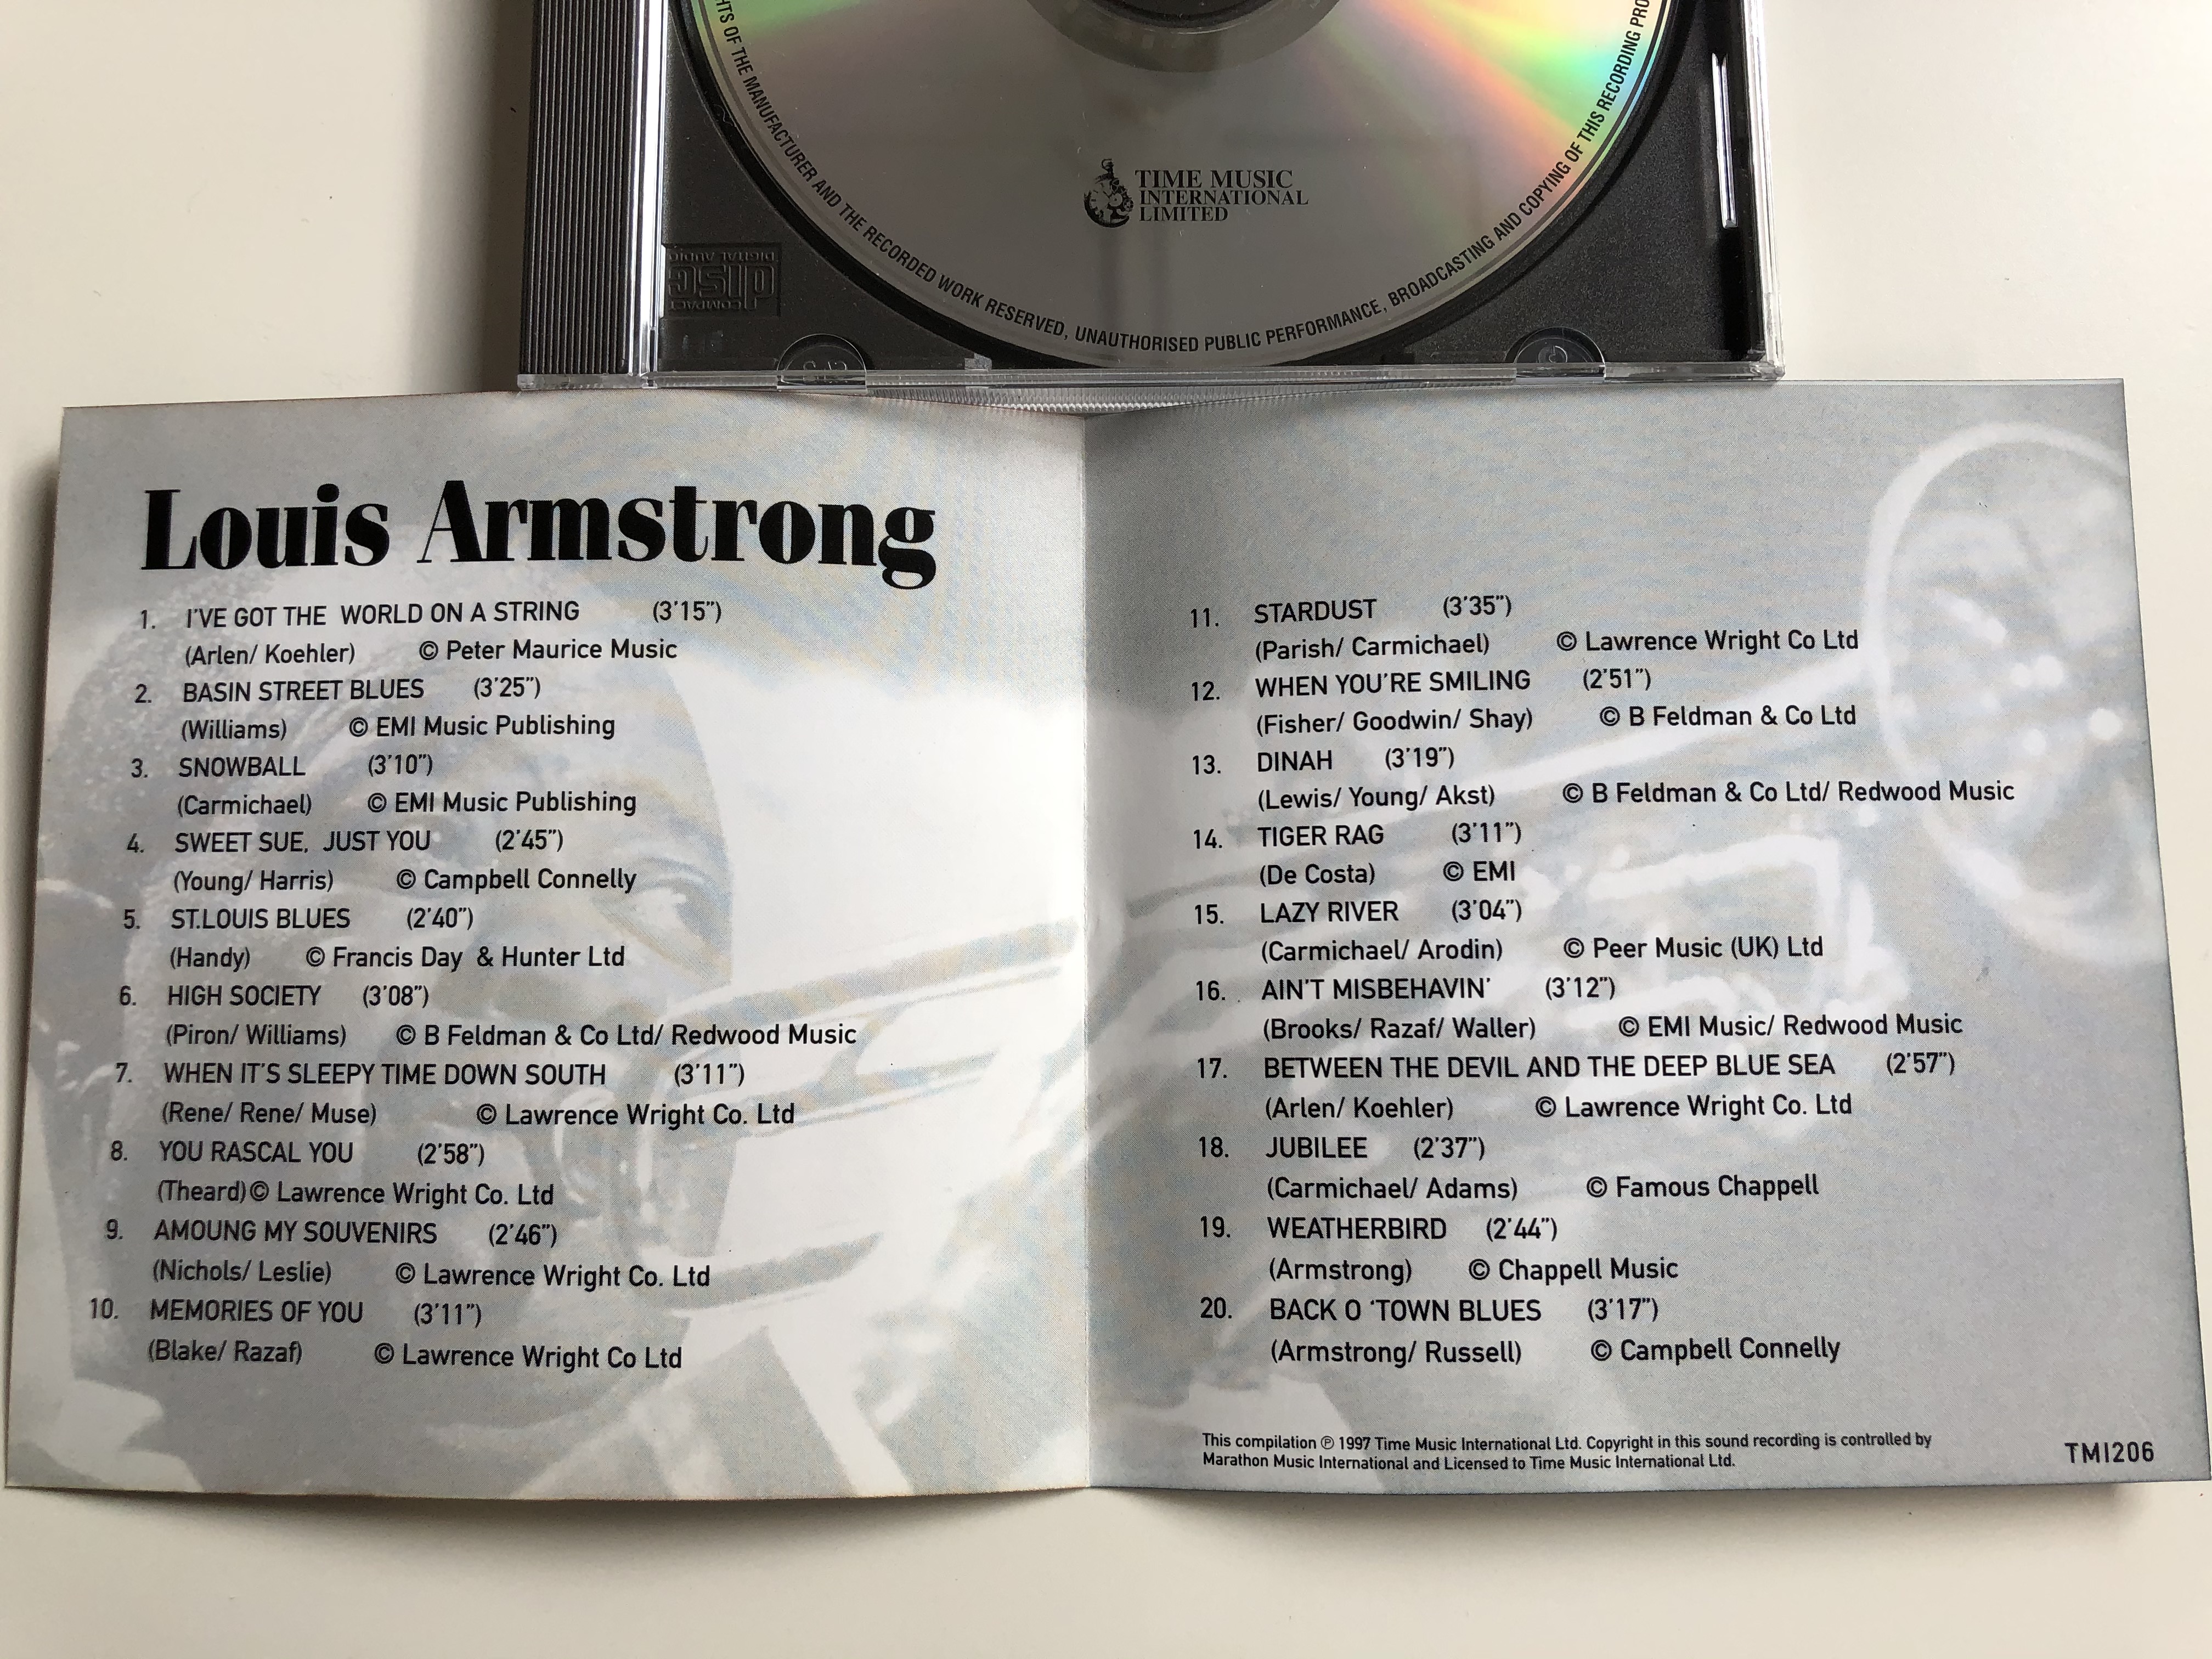 louis-armstrong-featuring-i-ve-got-the-world-on-a-string-basin-street-blues-st-louis-blues-time-music-international-limited-audio-cd-1997-tmi206-2-.jpg